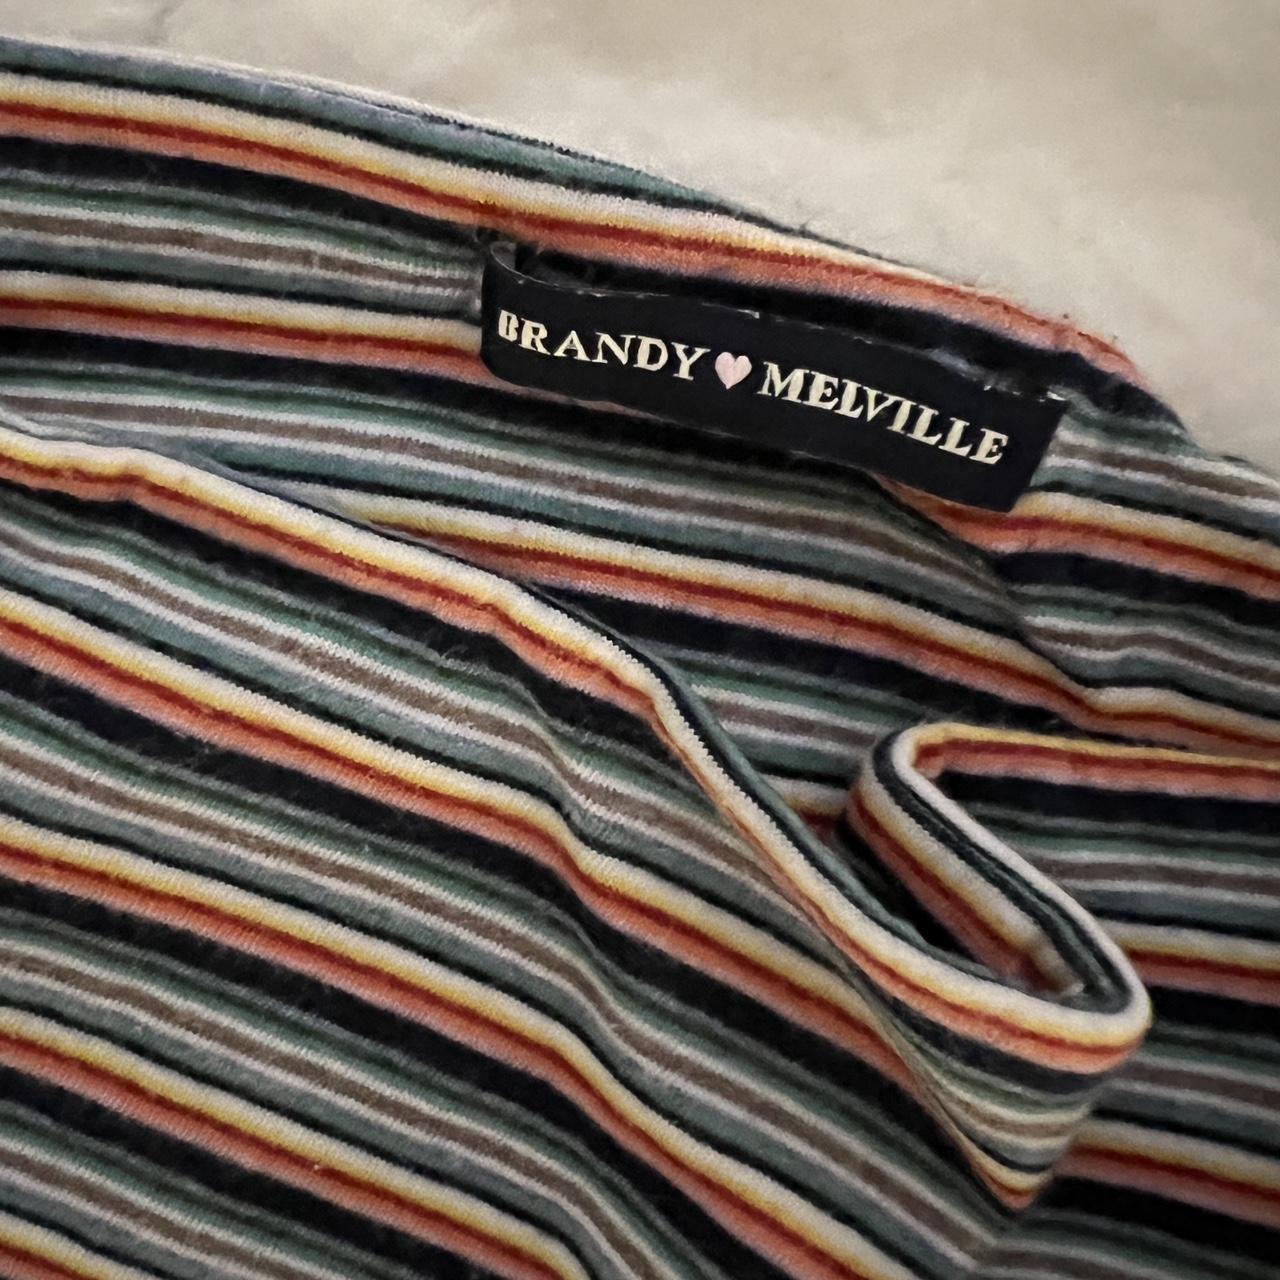 Brandy Melville Rainbow Tube Top - $18 (18% Off Retail) - From clara